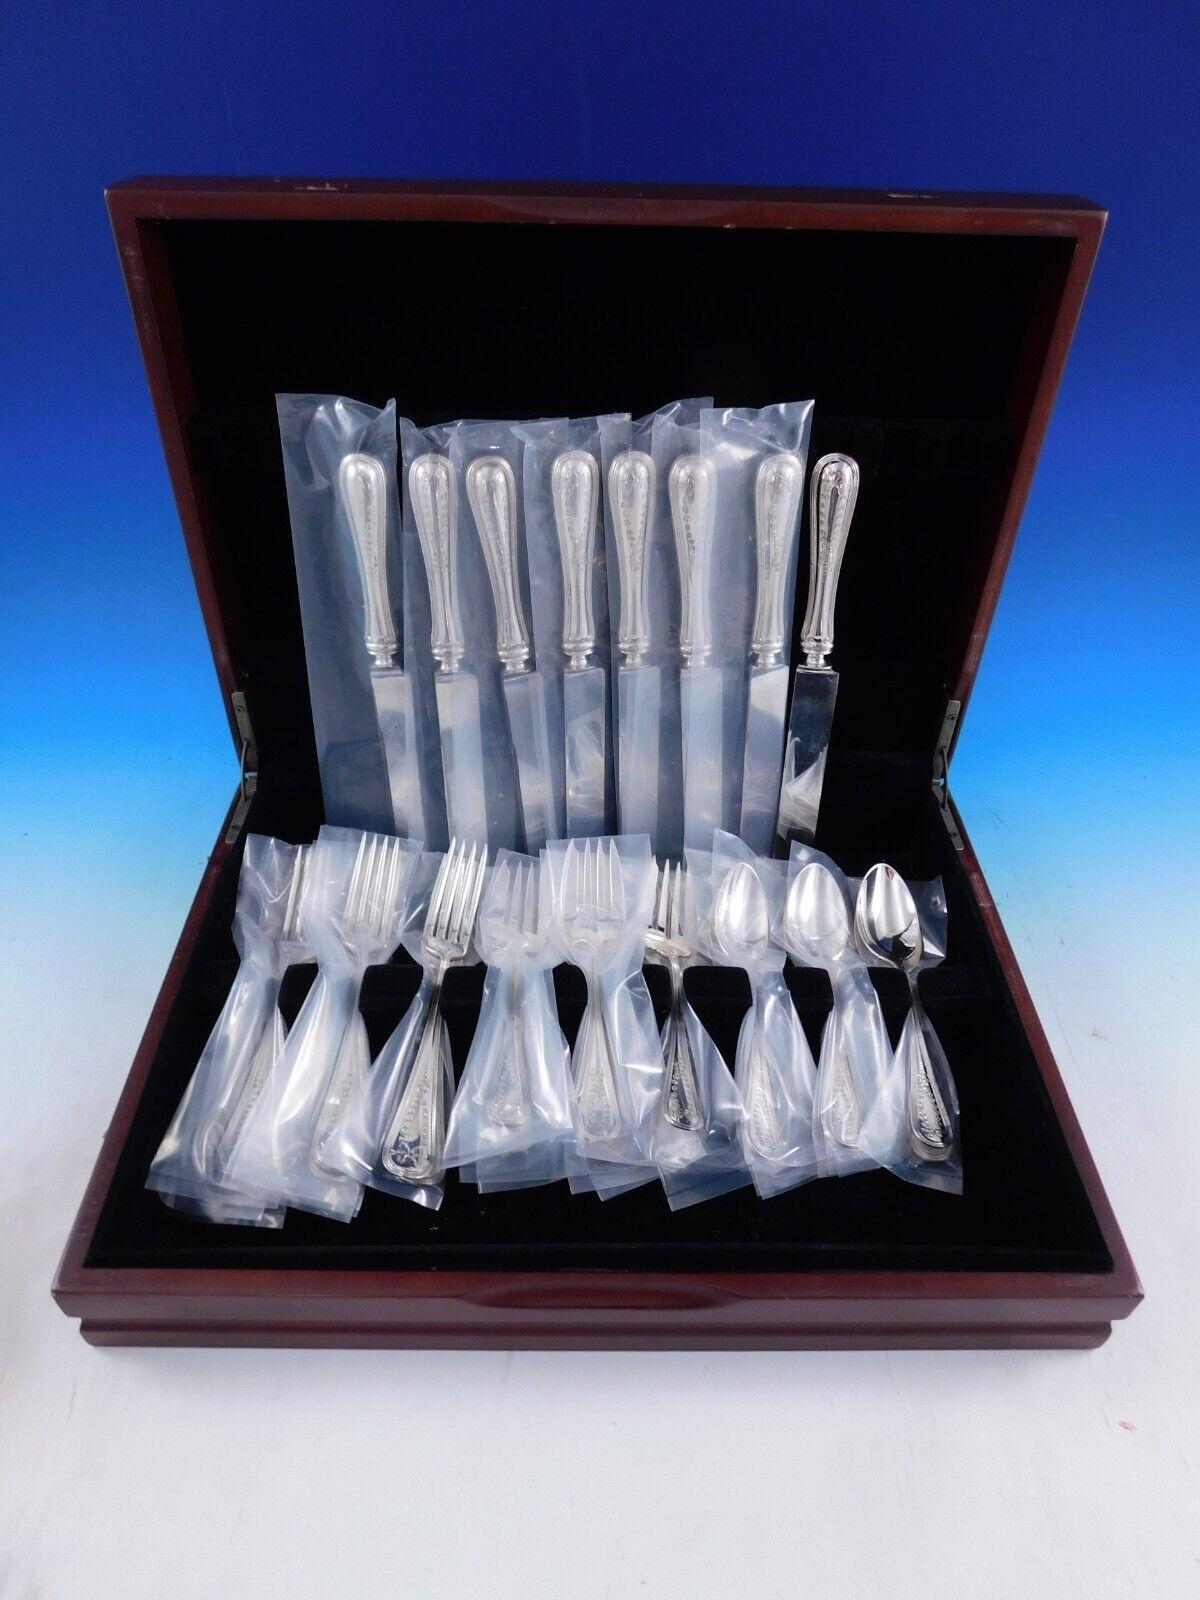 Gorgeous Commonwealth Engraved by Watson, c1908, with bright-cut bow and leaf design sterling silver Flatware set, 32 pieces. This set includes:

8 Regular Knives, 8 7/8